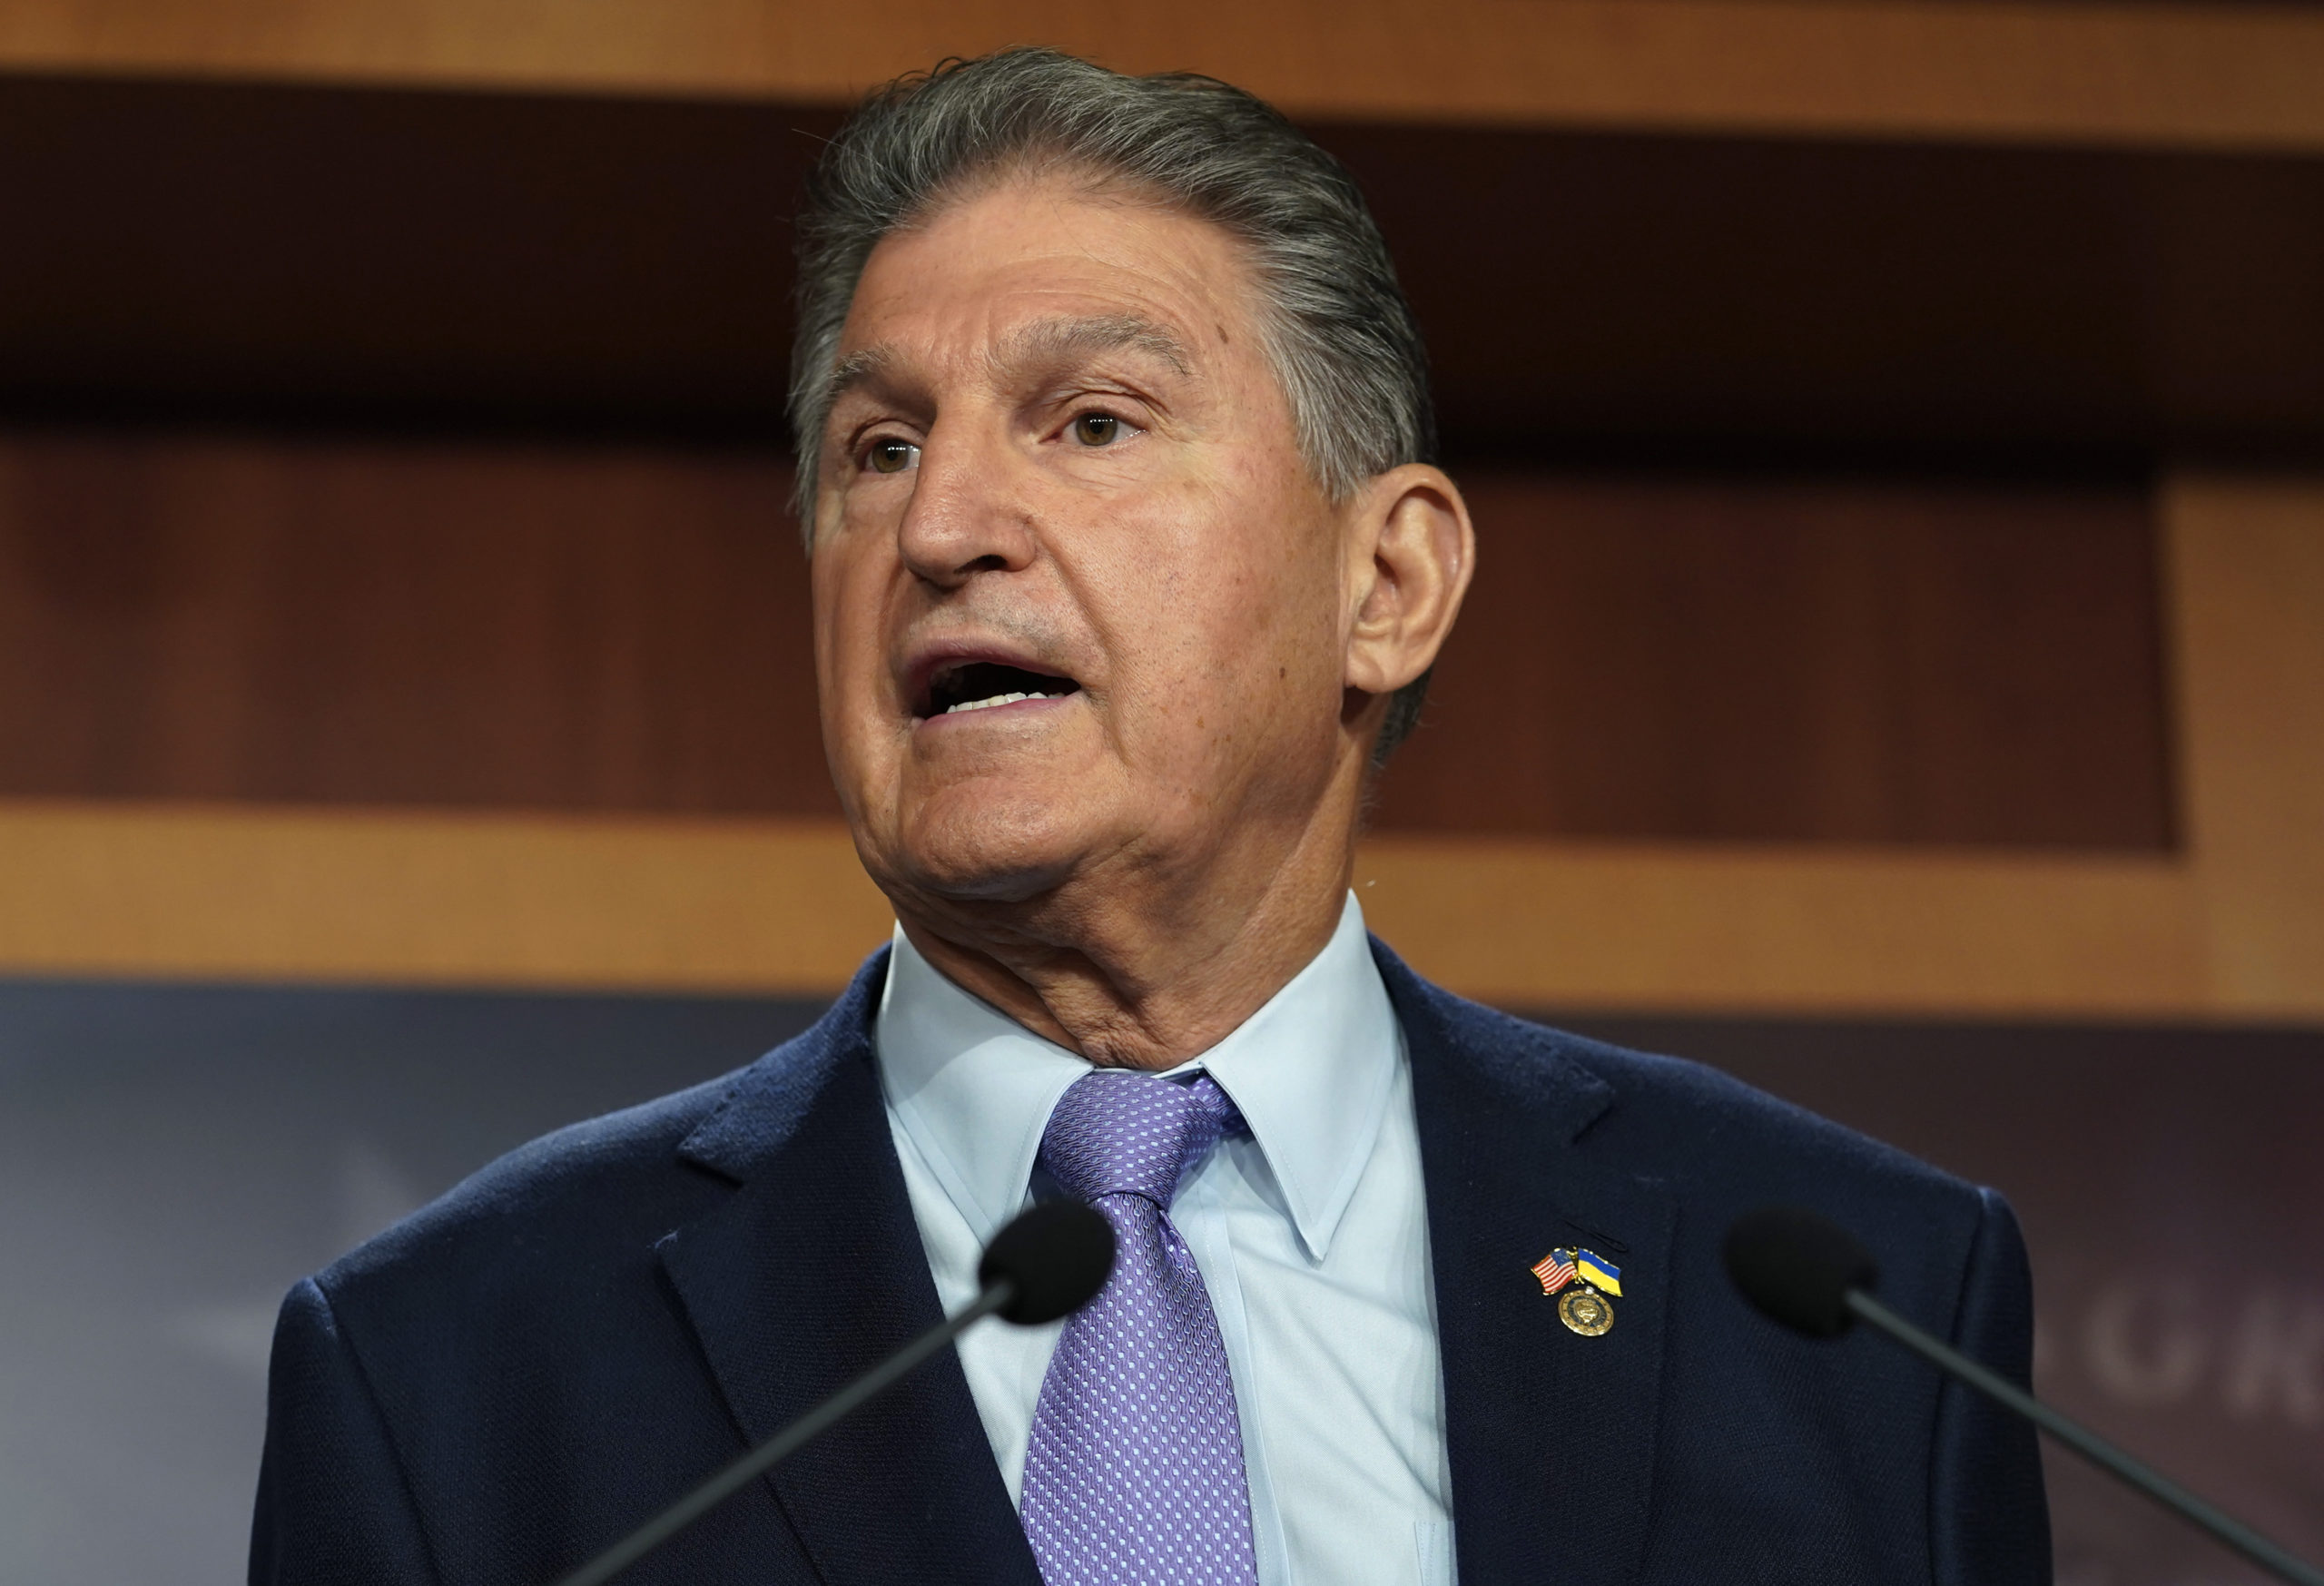 Democrat Sen. Joe Manchin of West Virginia criticized President Joe Biden for being “cavalier” and “divorced from reality” after vowing to shutter coal-fired electric plants and lean more heavily on wind and solar energy in the future.